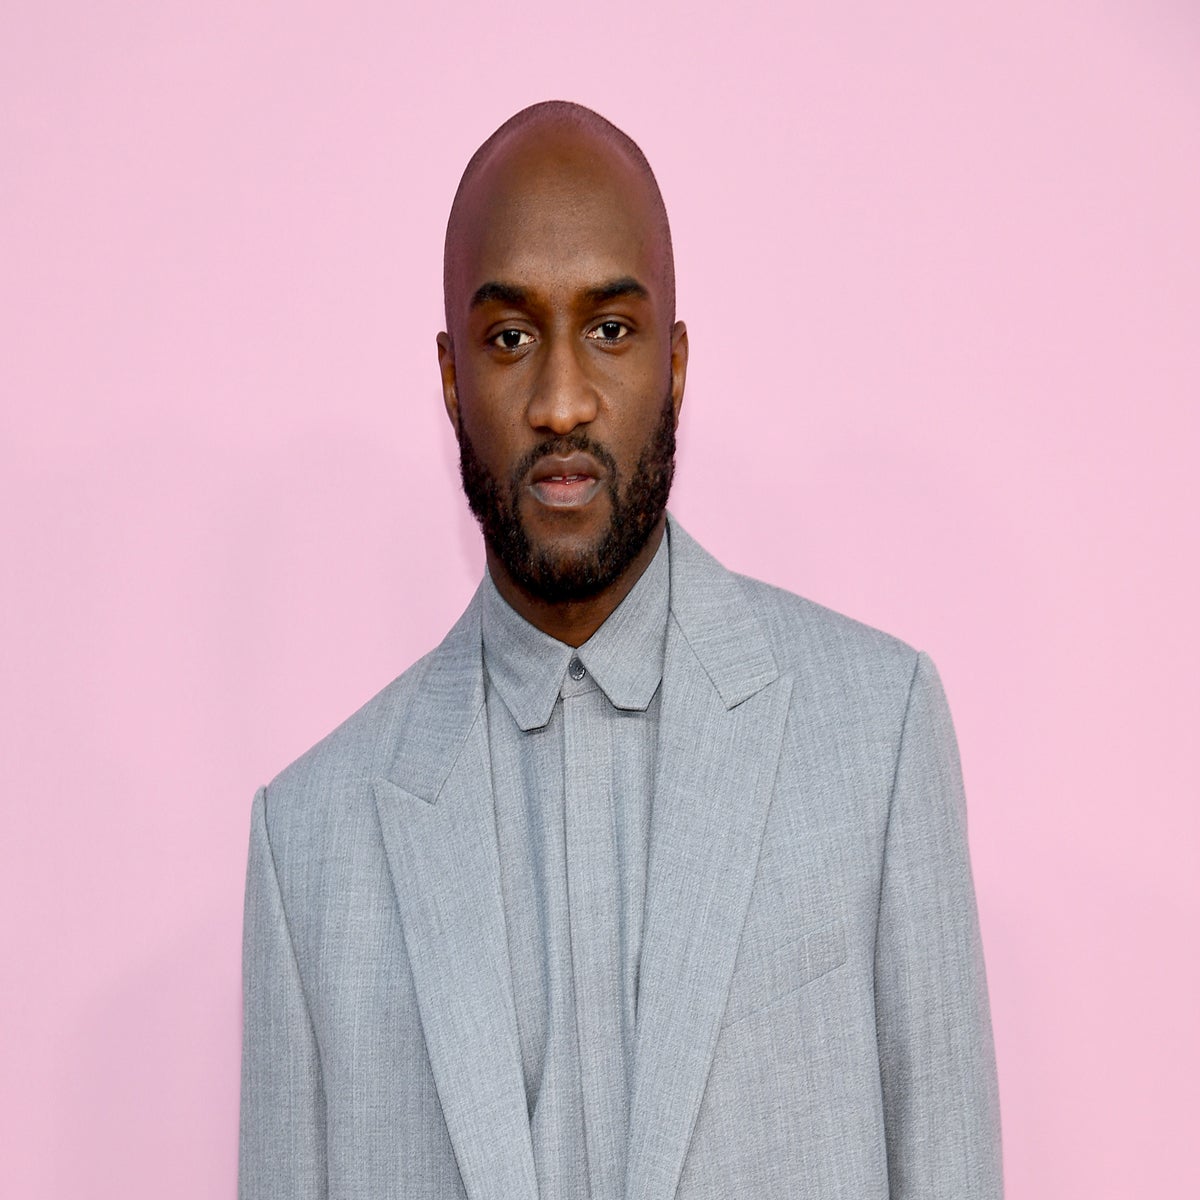 Virgil Abloh's impact on the sports industry was greater than we ever  imagined 